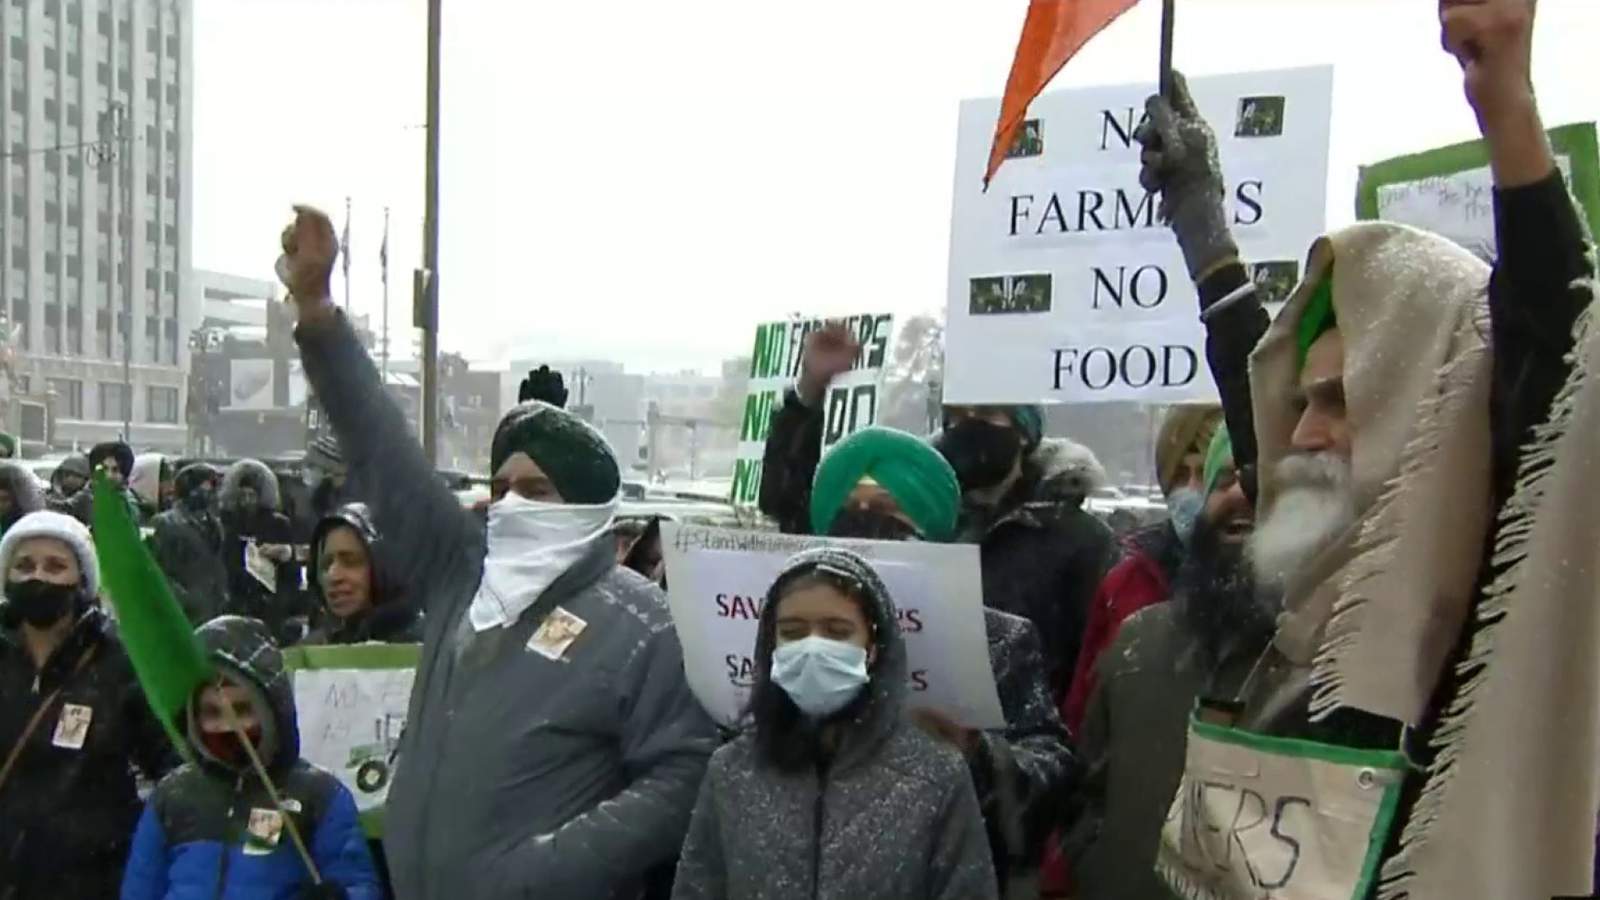 ‘It’s an environment of hope’ -- Thousands protest in Detroit in support of Indian farmers